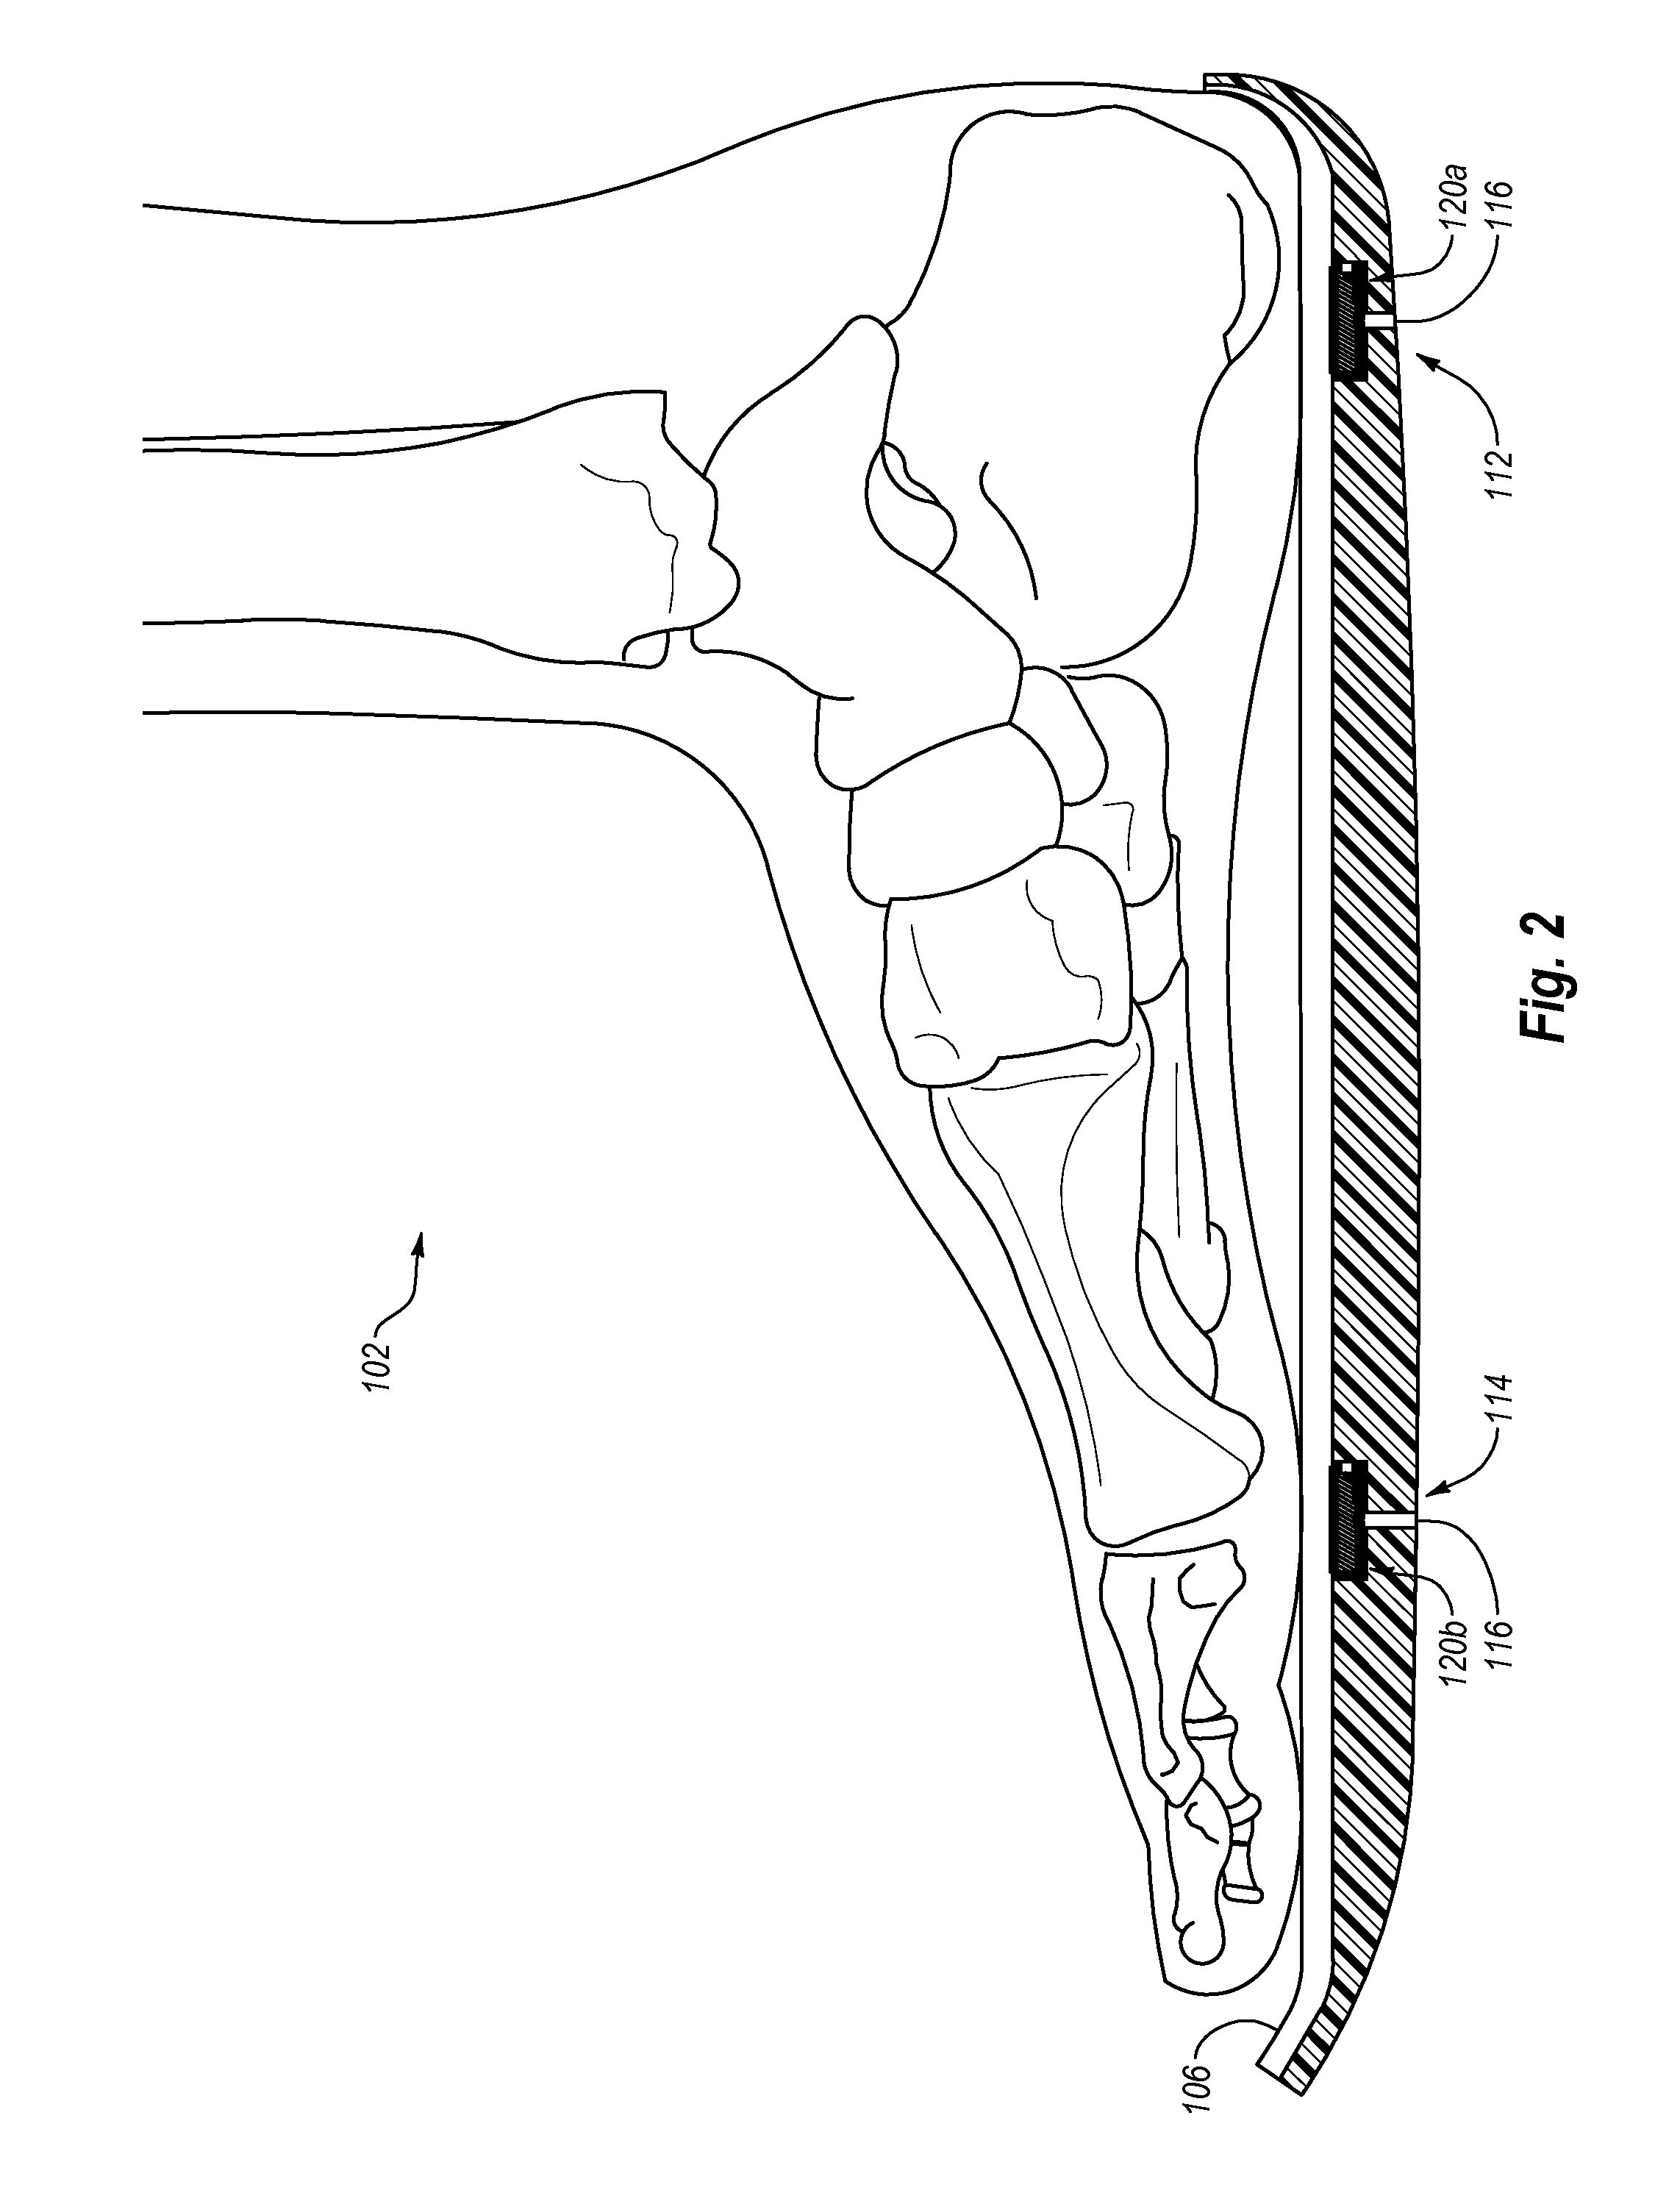 Systems, devices, and methods for monitoring an under foot load profile of a tibial fracture patient during a period of partial weight bearing